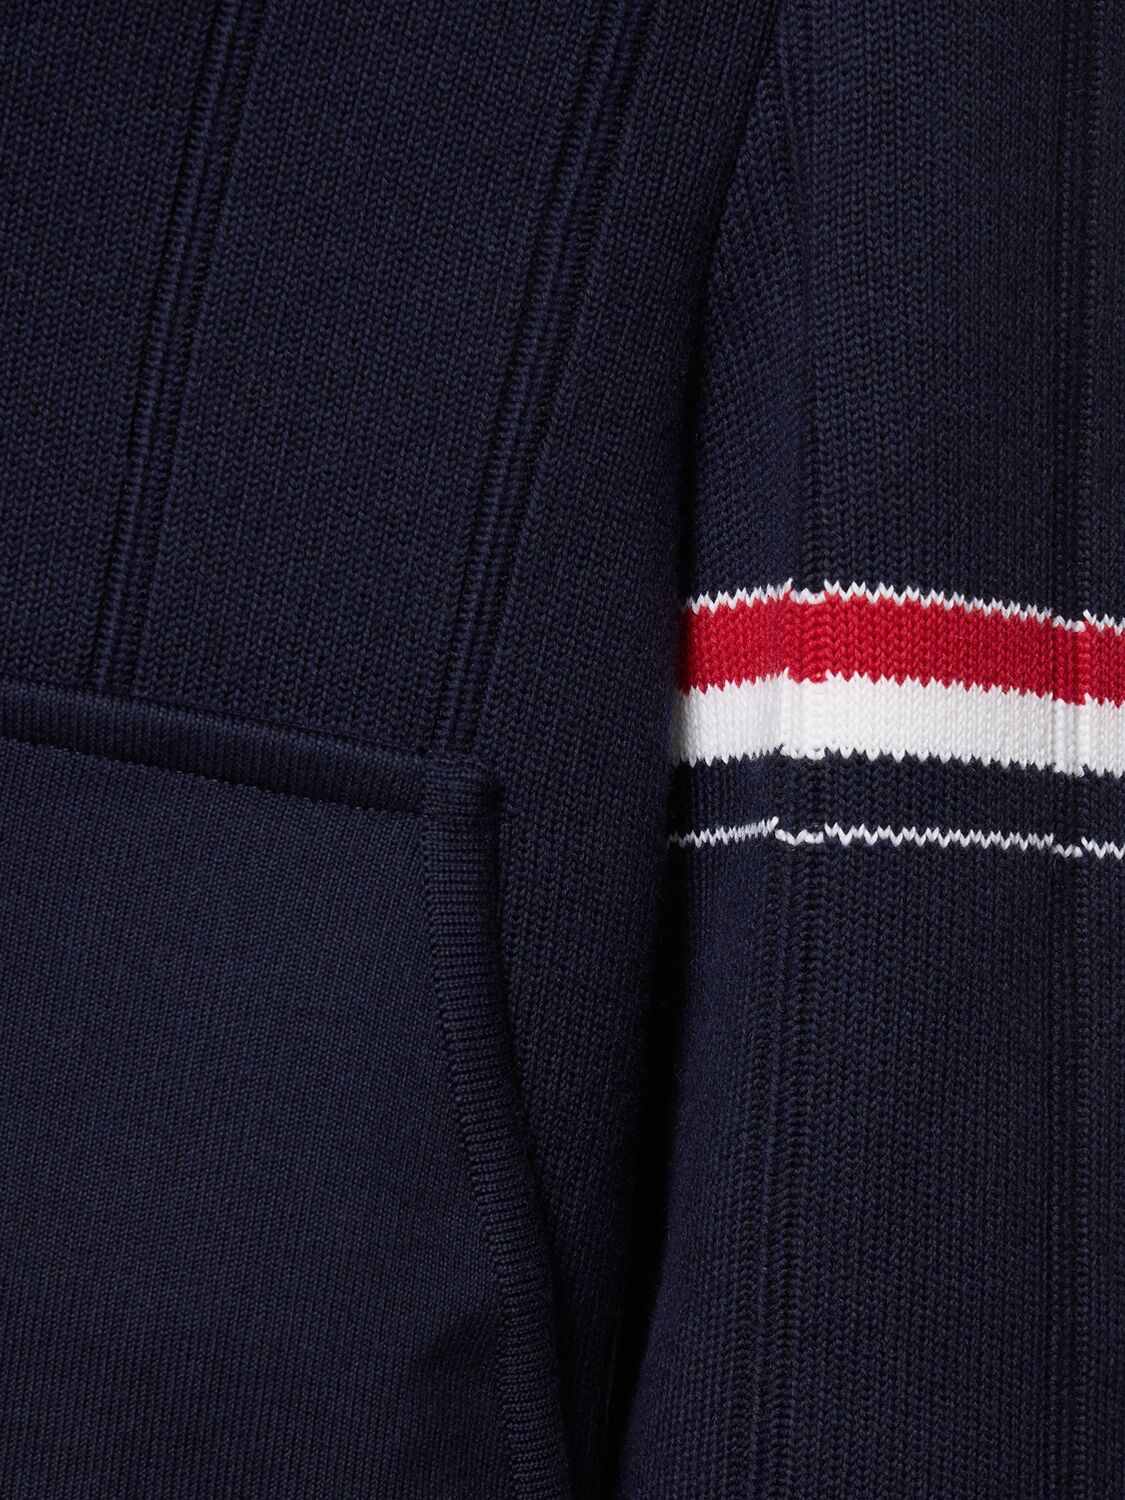 Shop Thom Browne Cotton & Cashmere Jacket In Navy